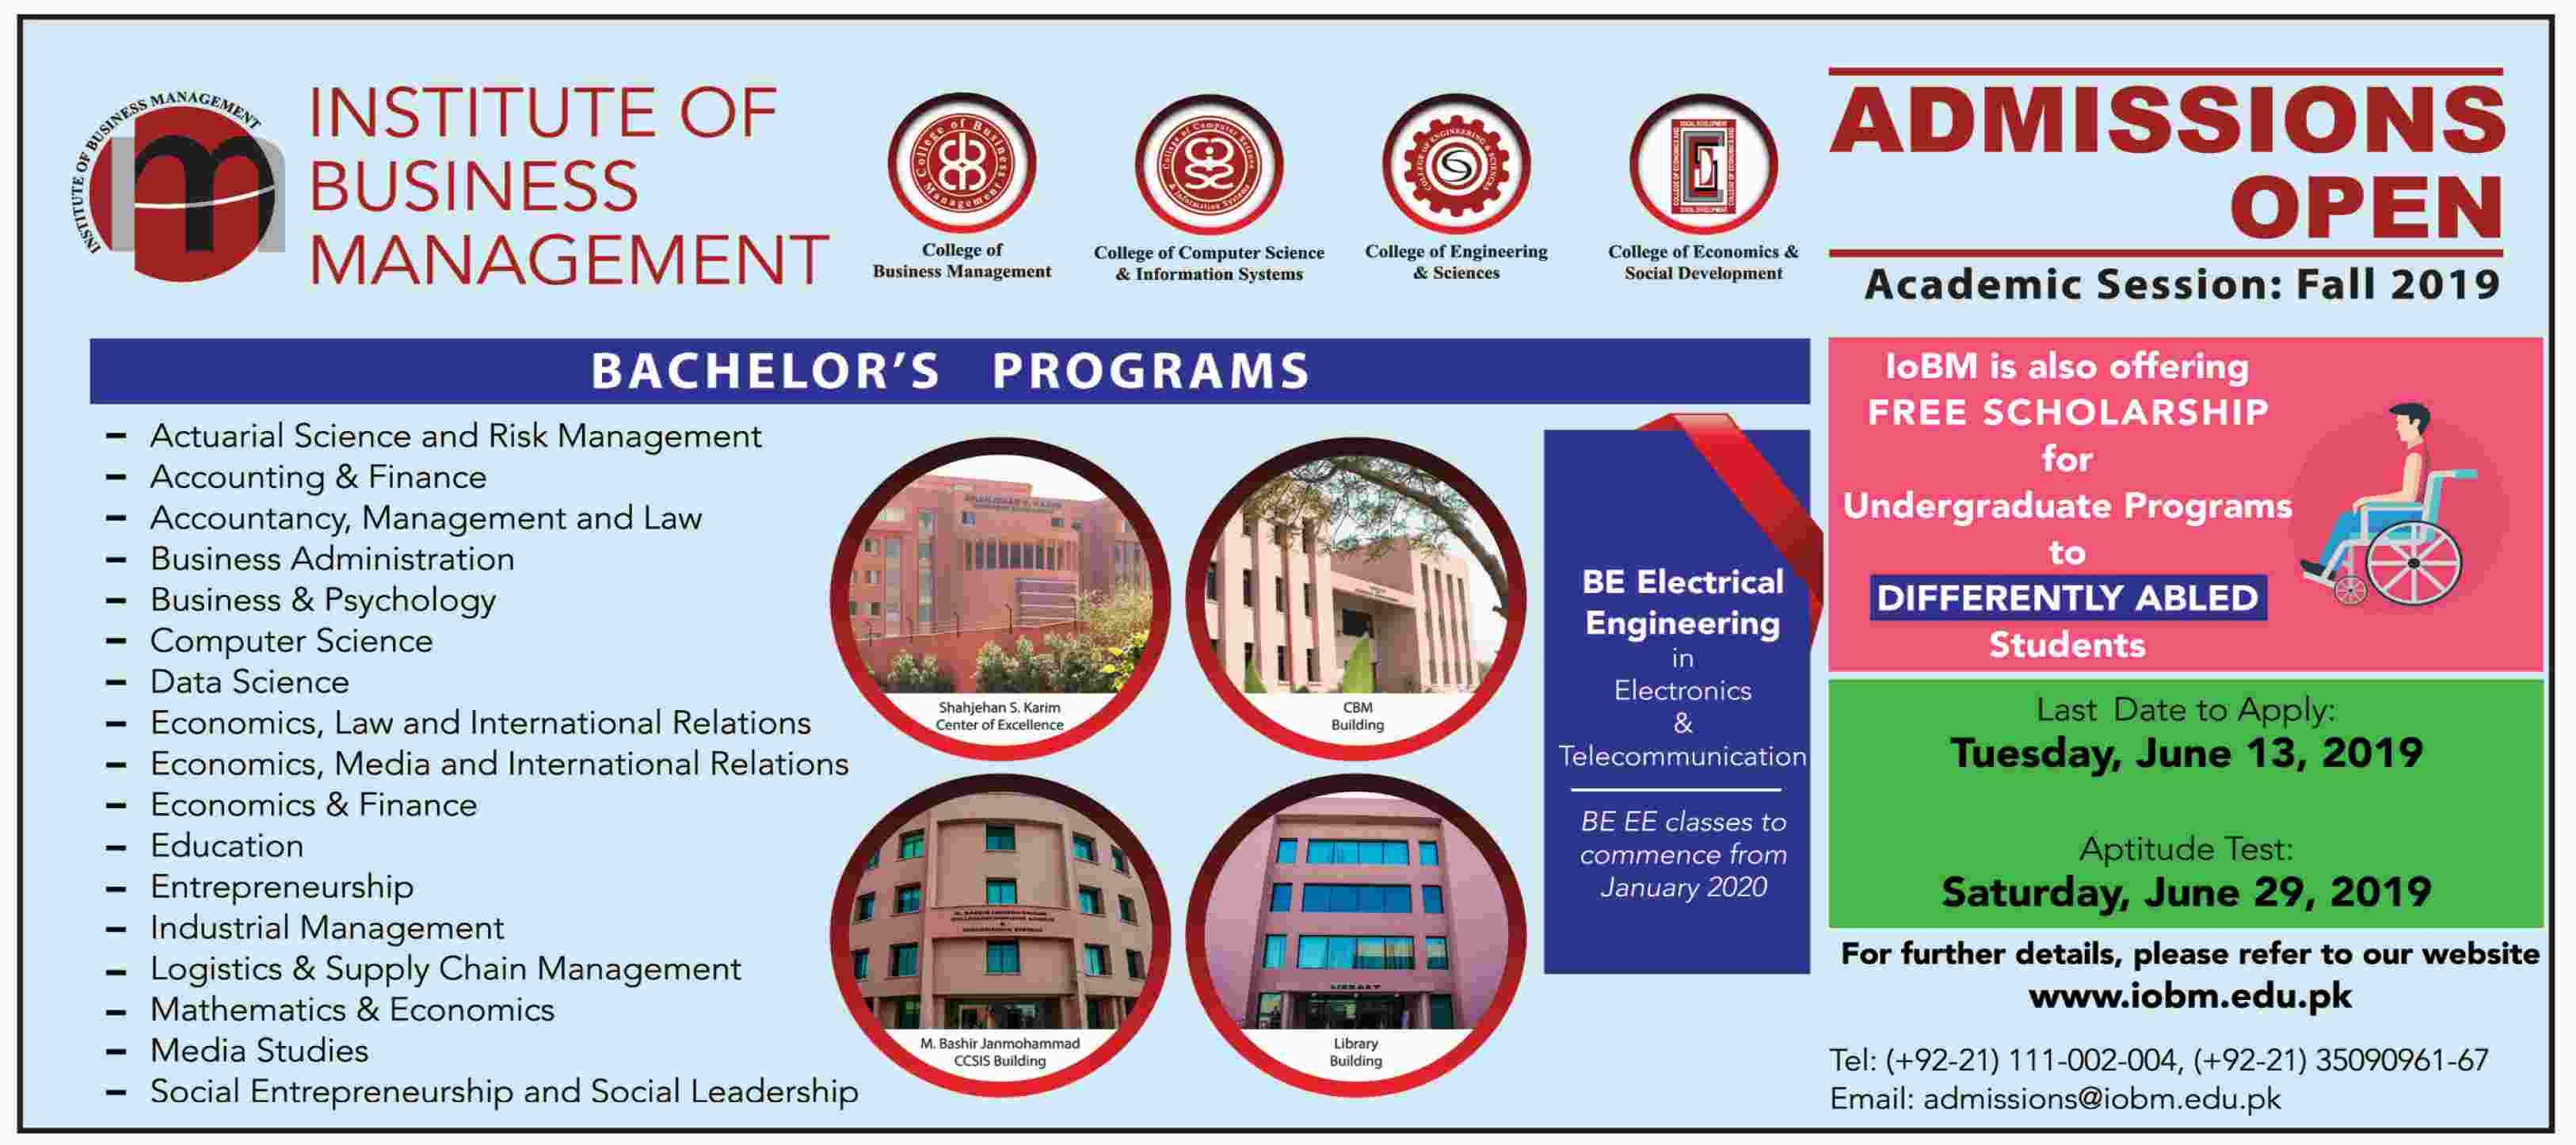 Institute Of Business Management Admissions 2022 IOBM Fall